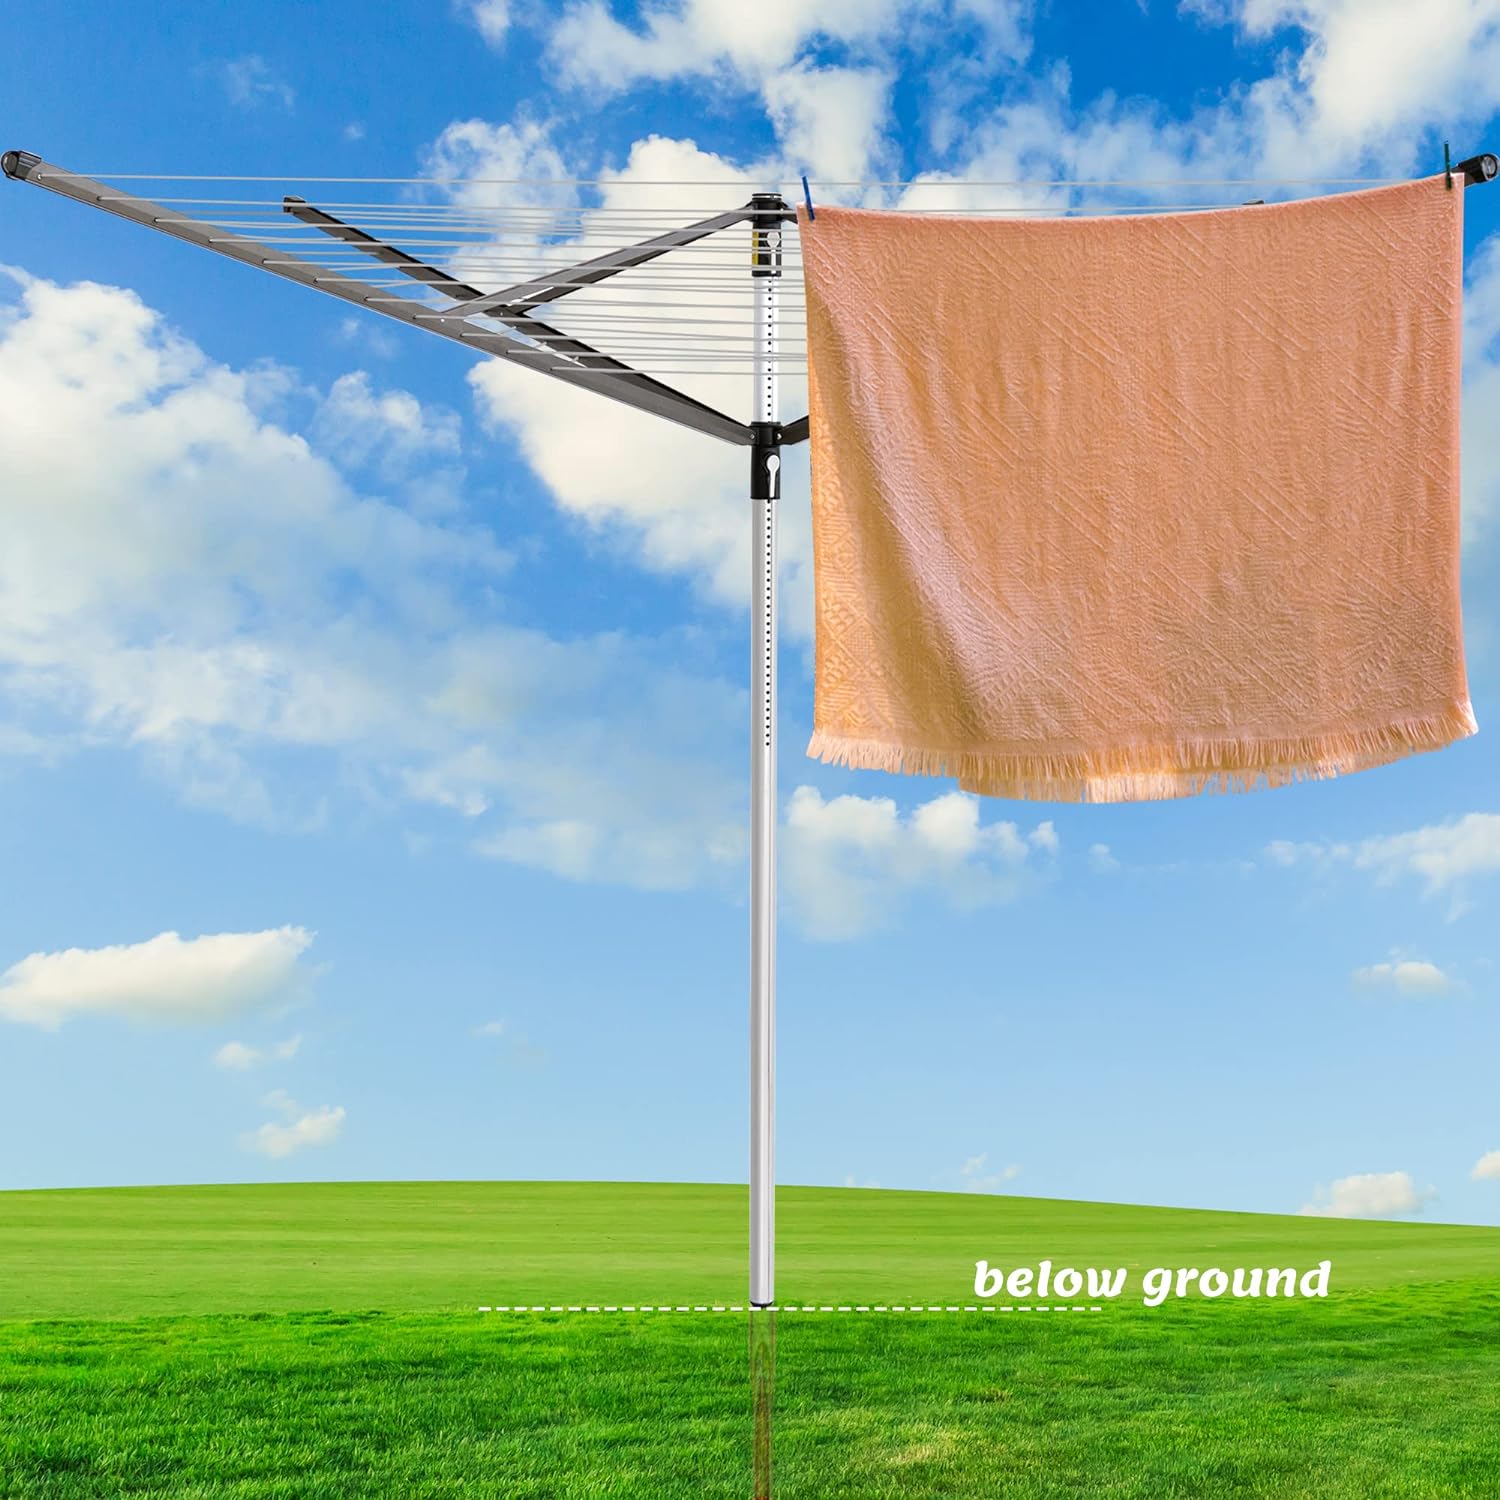 https://bigbigmart.com/wp-content/uploads/2023/12/Bizvalue-Clothesline-Outdoor-Rotary-Dryer-4-Arms-Foldable-Heavy-Duty-Height-Adjustable-Clothes-Drying-Rack-196FT-Drying-Space-Hang-Wet-or-Dry-Laundry3.jpg